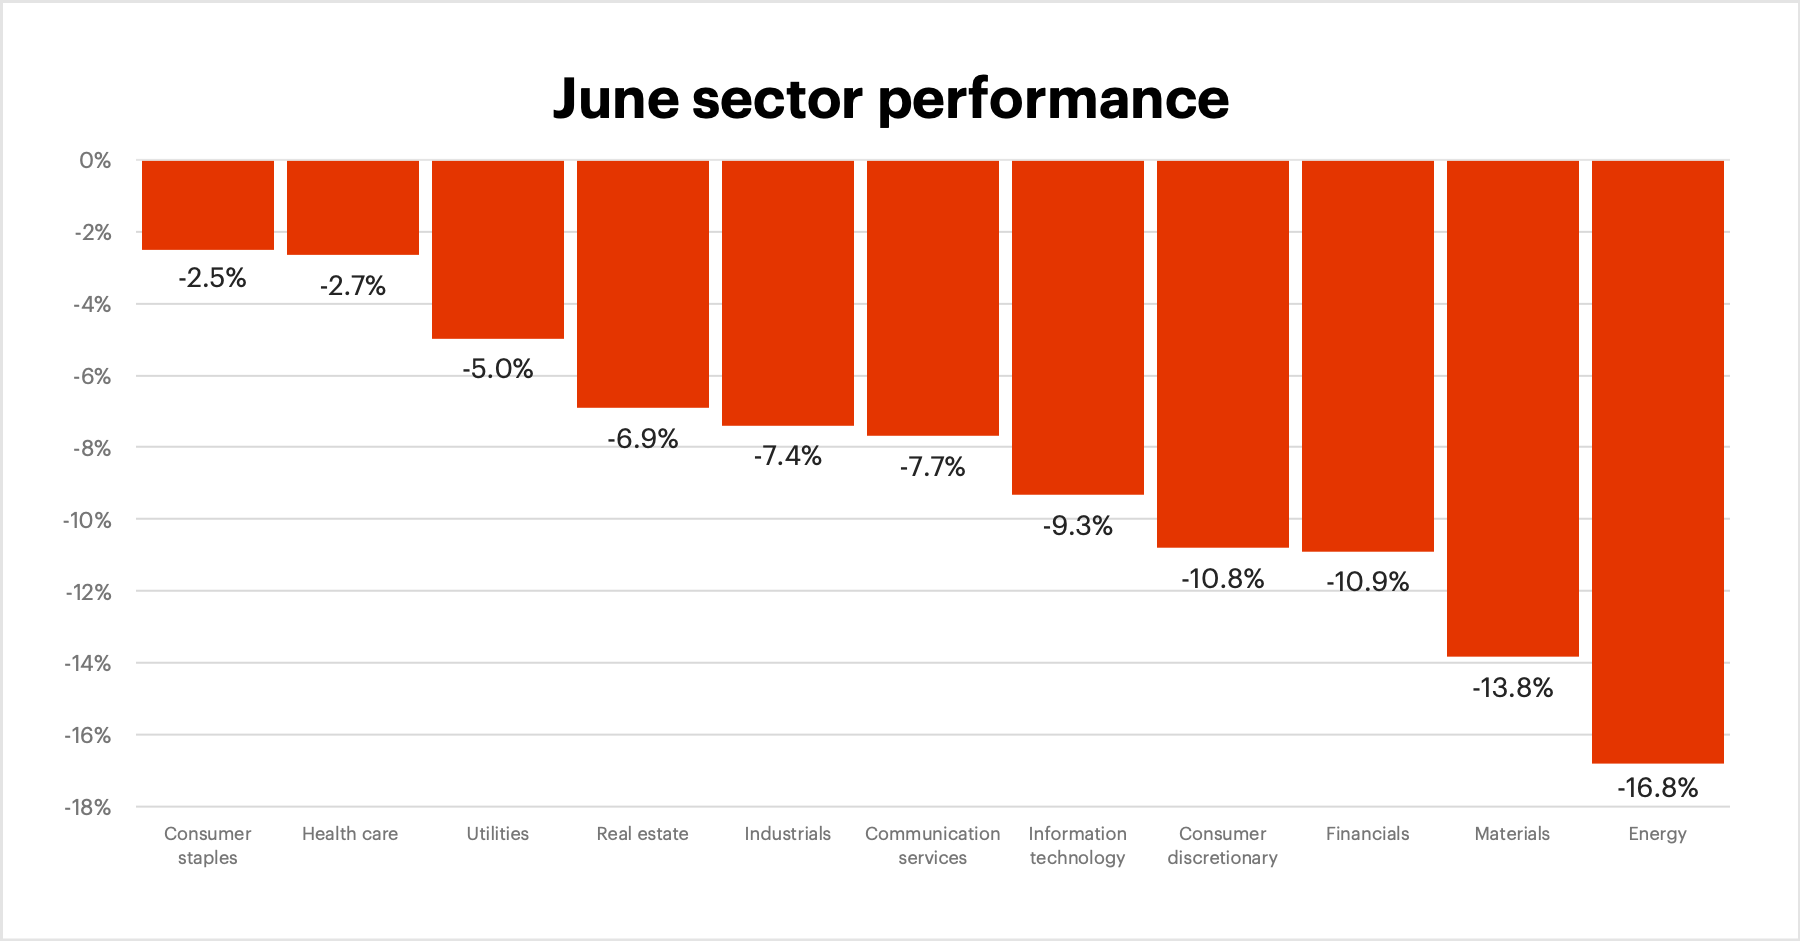 June 2022 sector performance